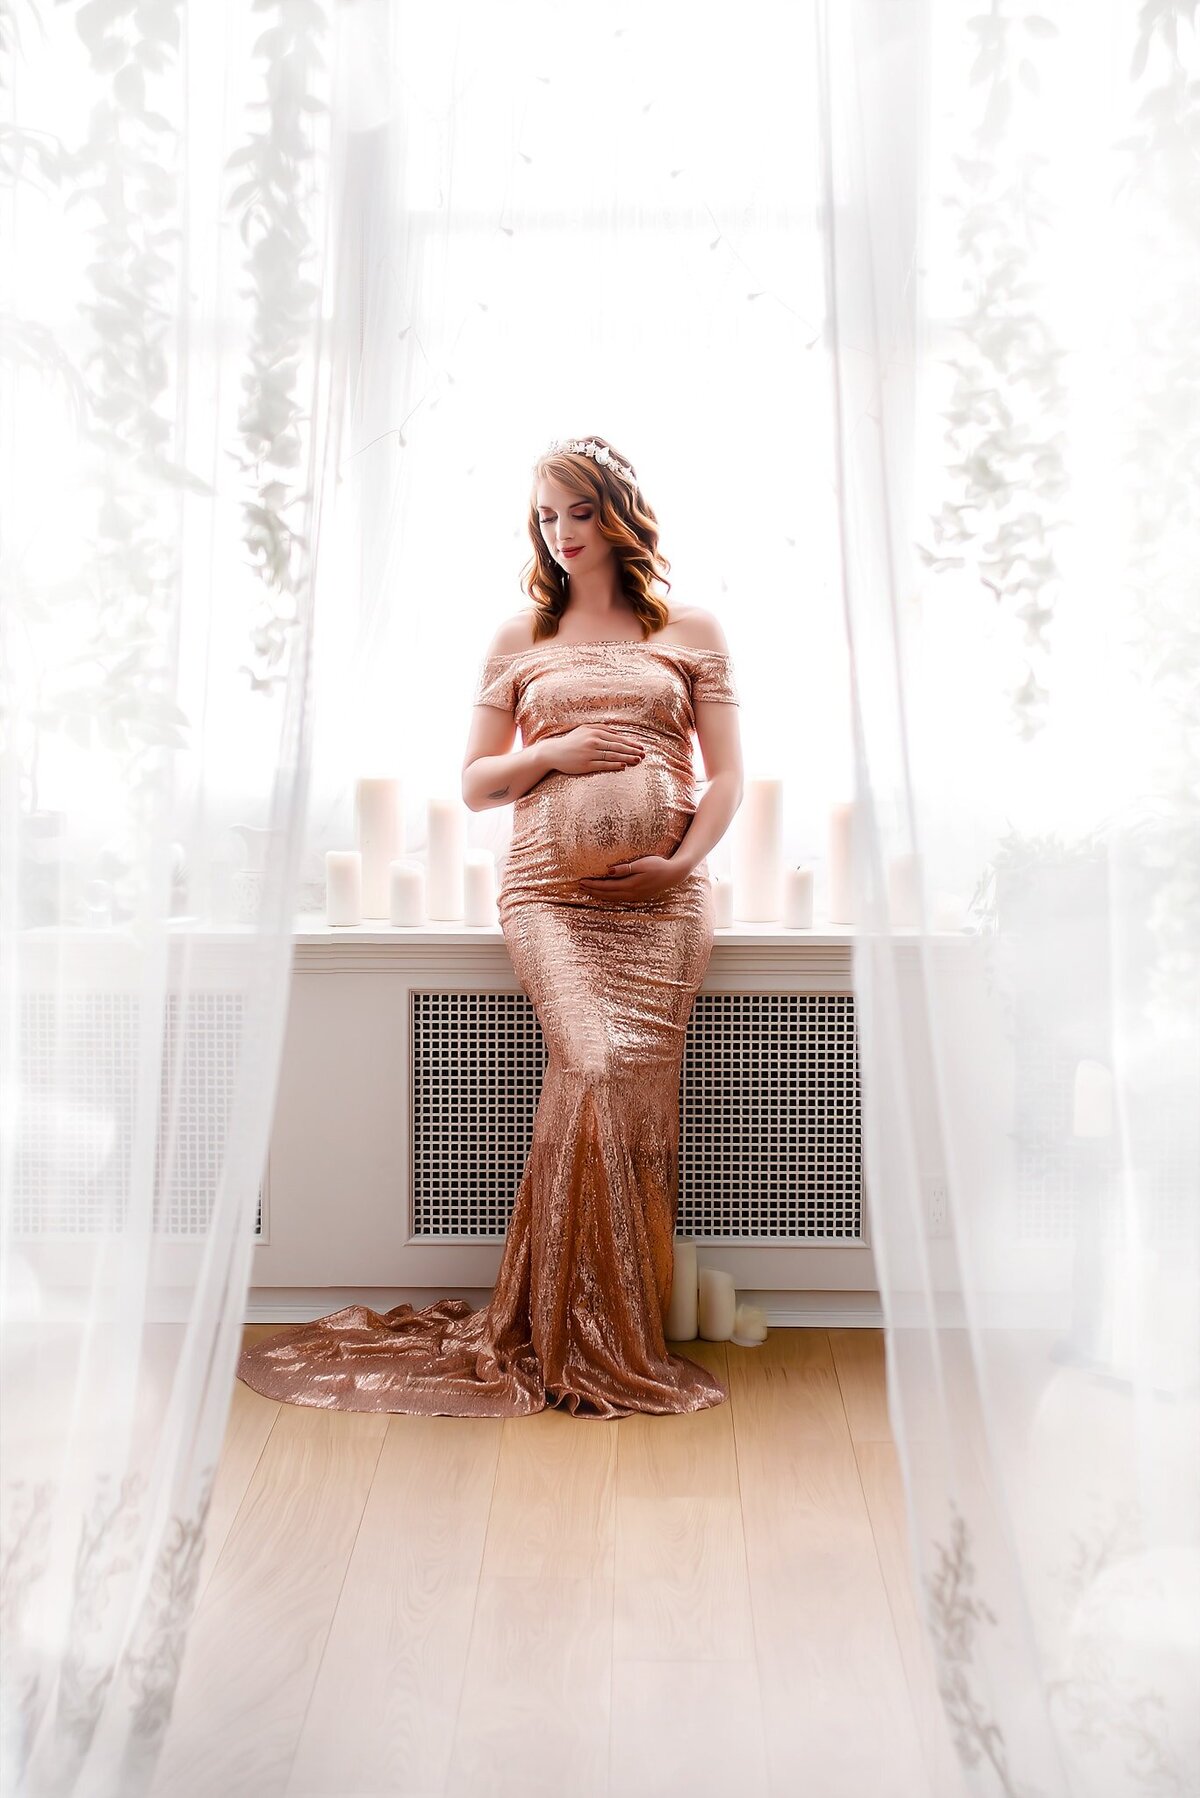 Vancouver Natural Light Studio Maternity Photography